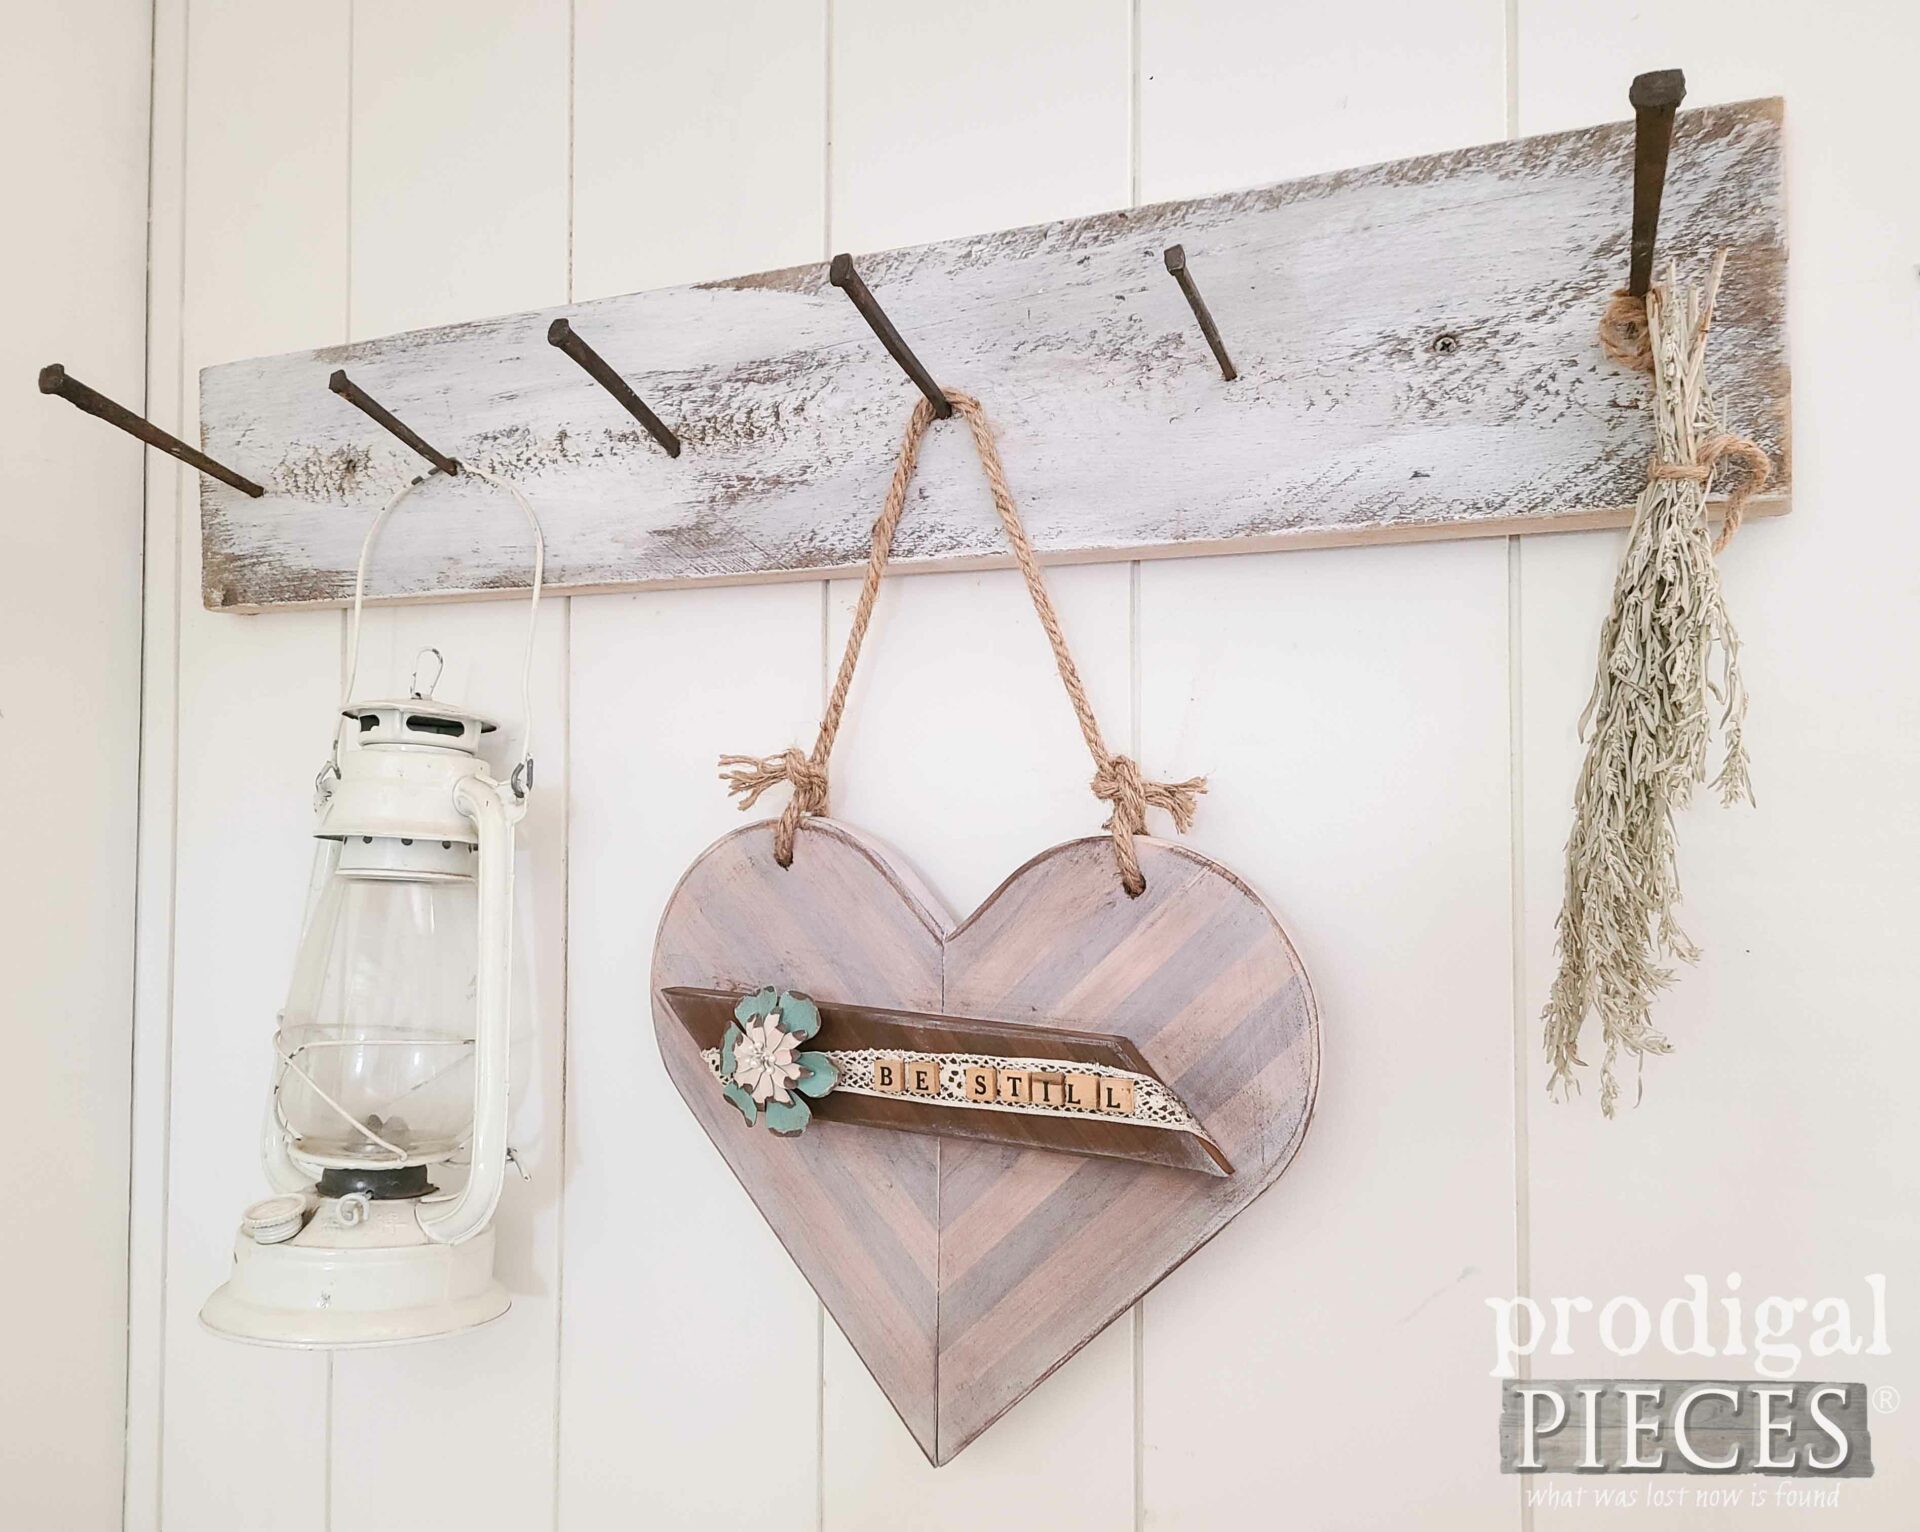 Farmhouse Style Wooden Heart Created from Upcycled Wooden Trivet by Larissa of Prodigal Pieces | prodigalpieces.com #prodigalpieces #repurposed #upcycled